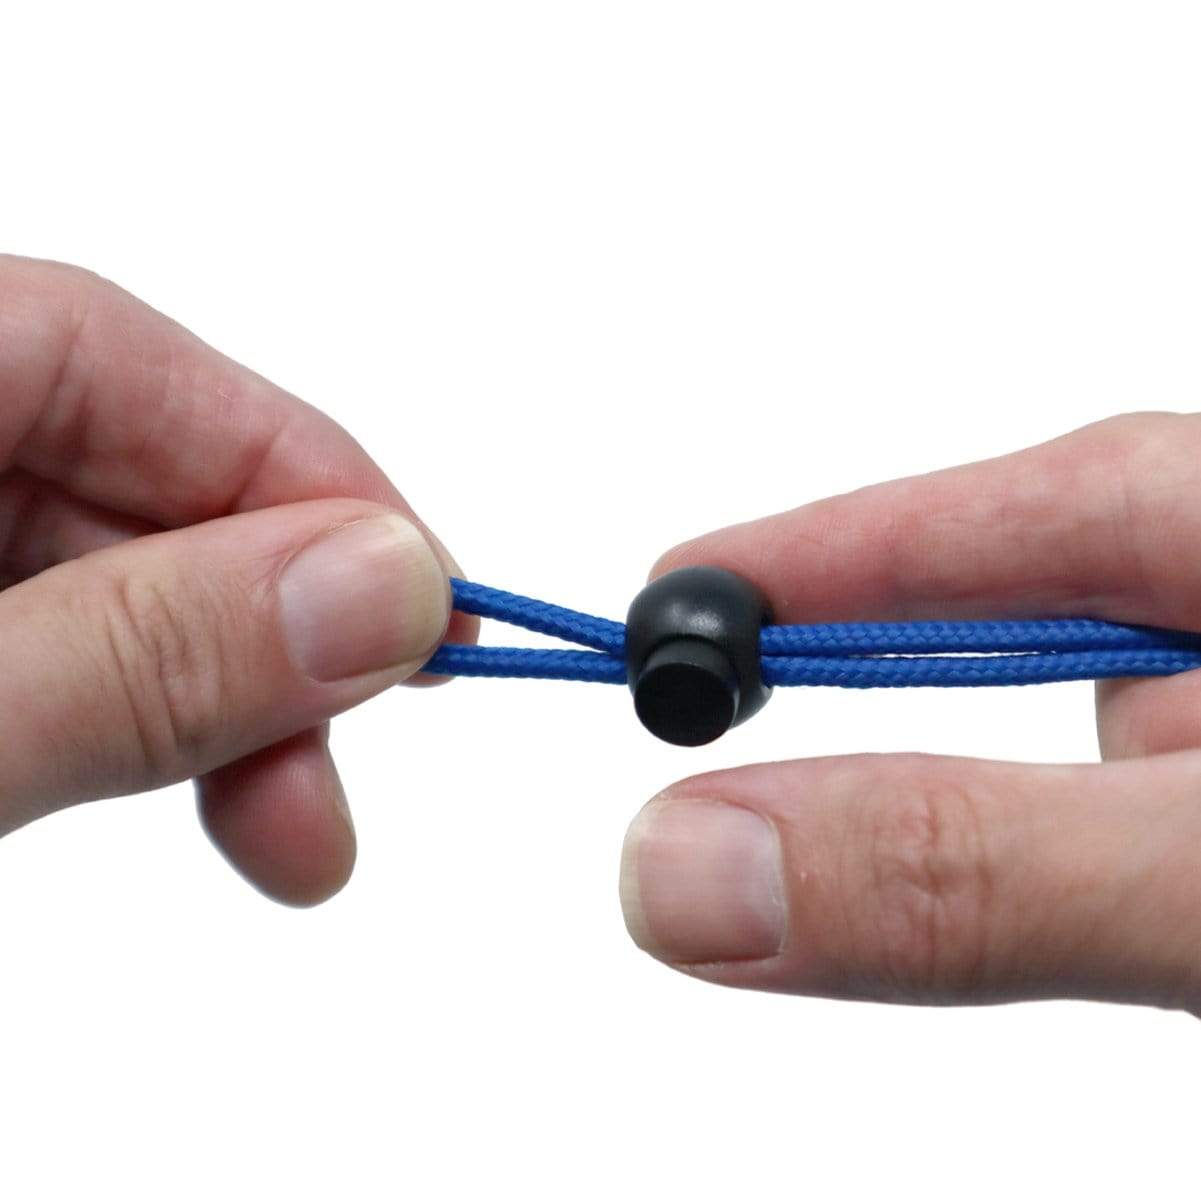 Two hands are adjusting an Adjustable Cord Lock - Round Ball Style - Single Hole End Toggle for DIY Projects (2135-4001) with black plastic toggle fasteners.